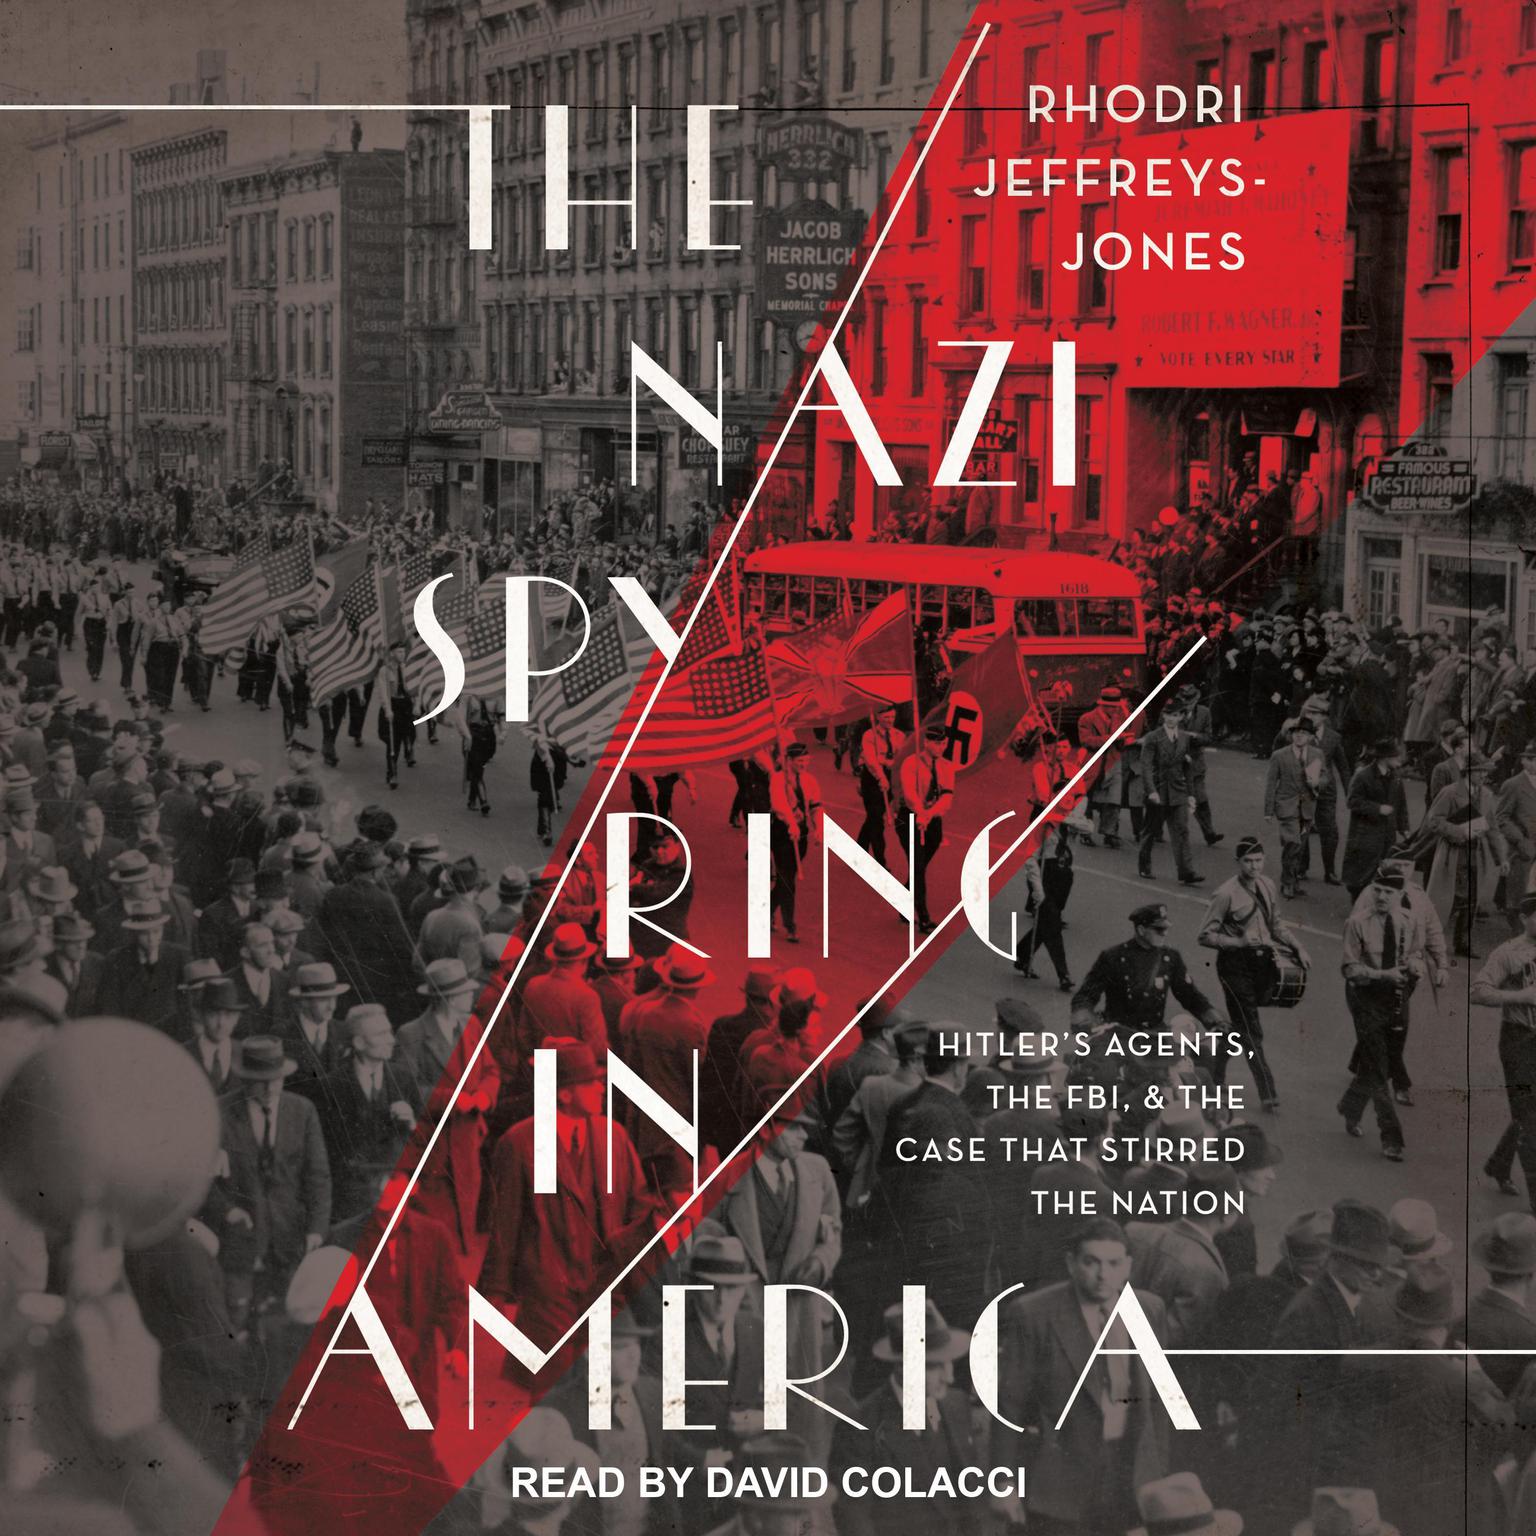 The Nazi Spy Ring in America: Hitlers Agents, the FBI, and the Case That Stirred the Nation Audiobook, by Rhodri Jeffreys-Jones